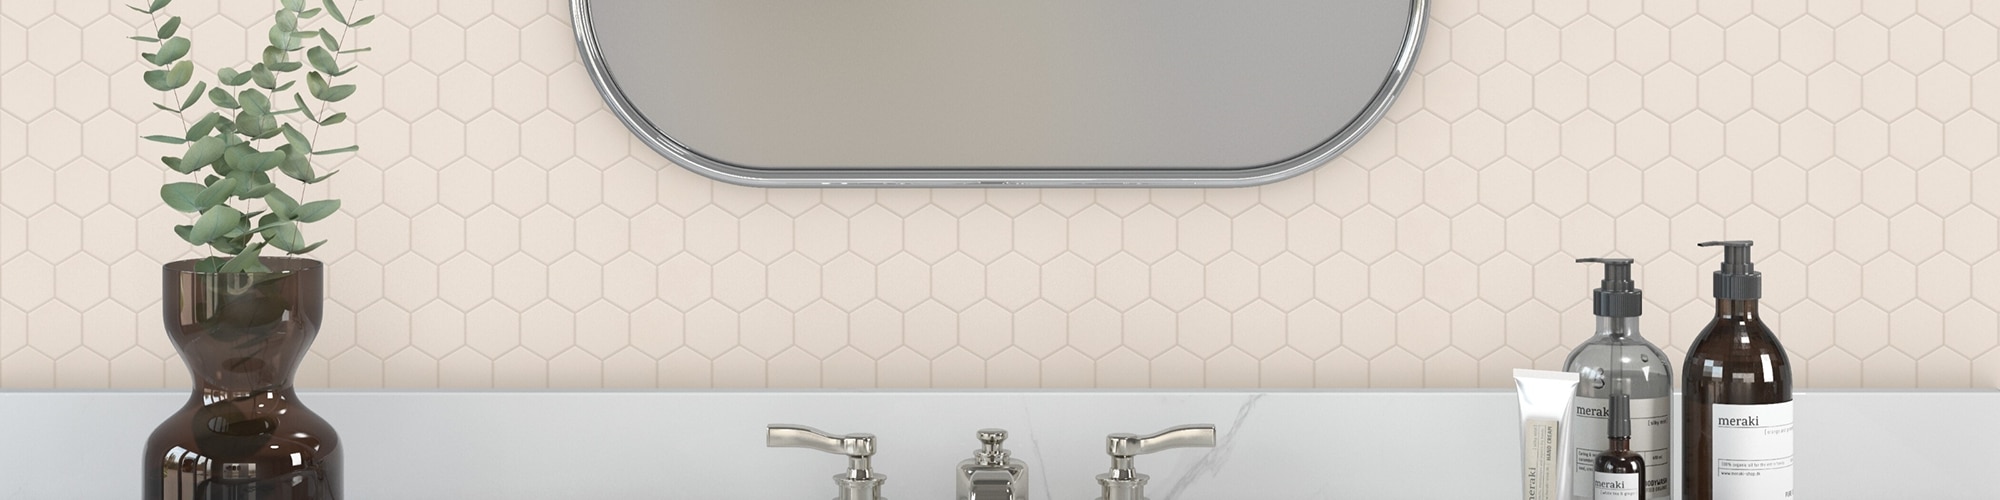 Bathroom vanity area with off-white hexagon mosaic tile backsplash, silver framed mirror, vase holding eucalyptus leaves, pump lotion and hand soap.